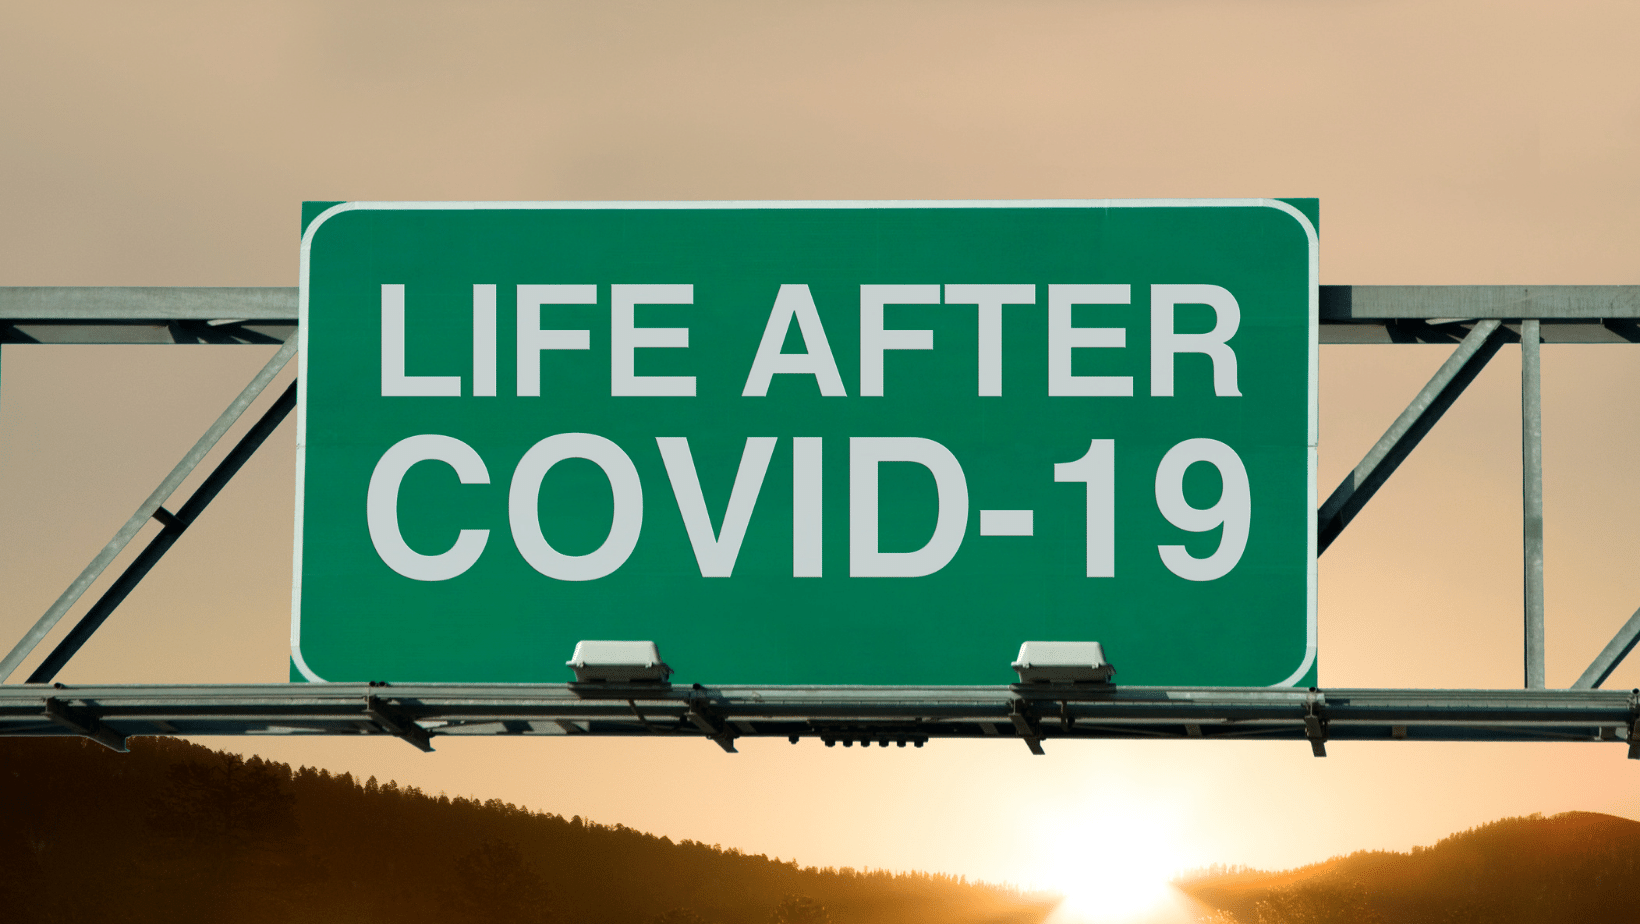 Life after covid - income temporary shut down after covid 19 - Bruce Croskey Real Estate